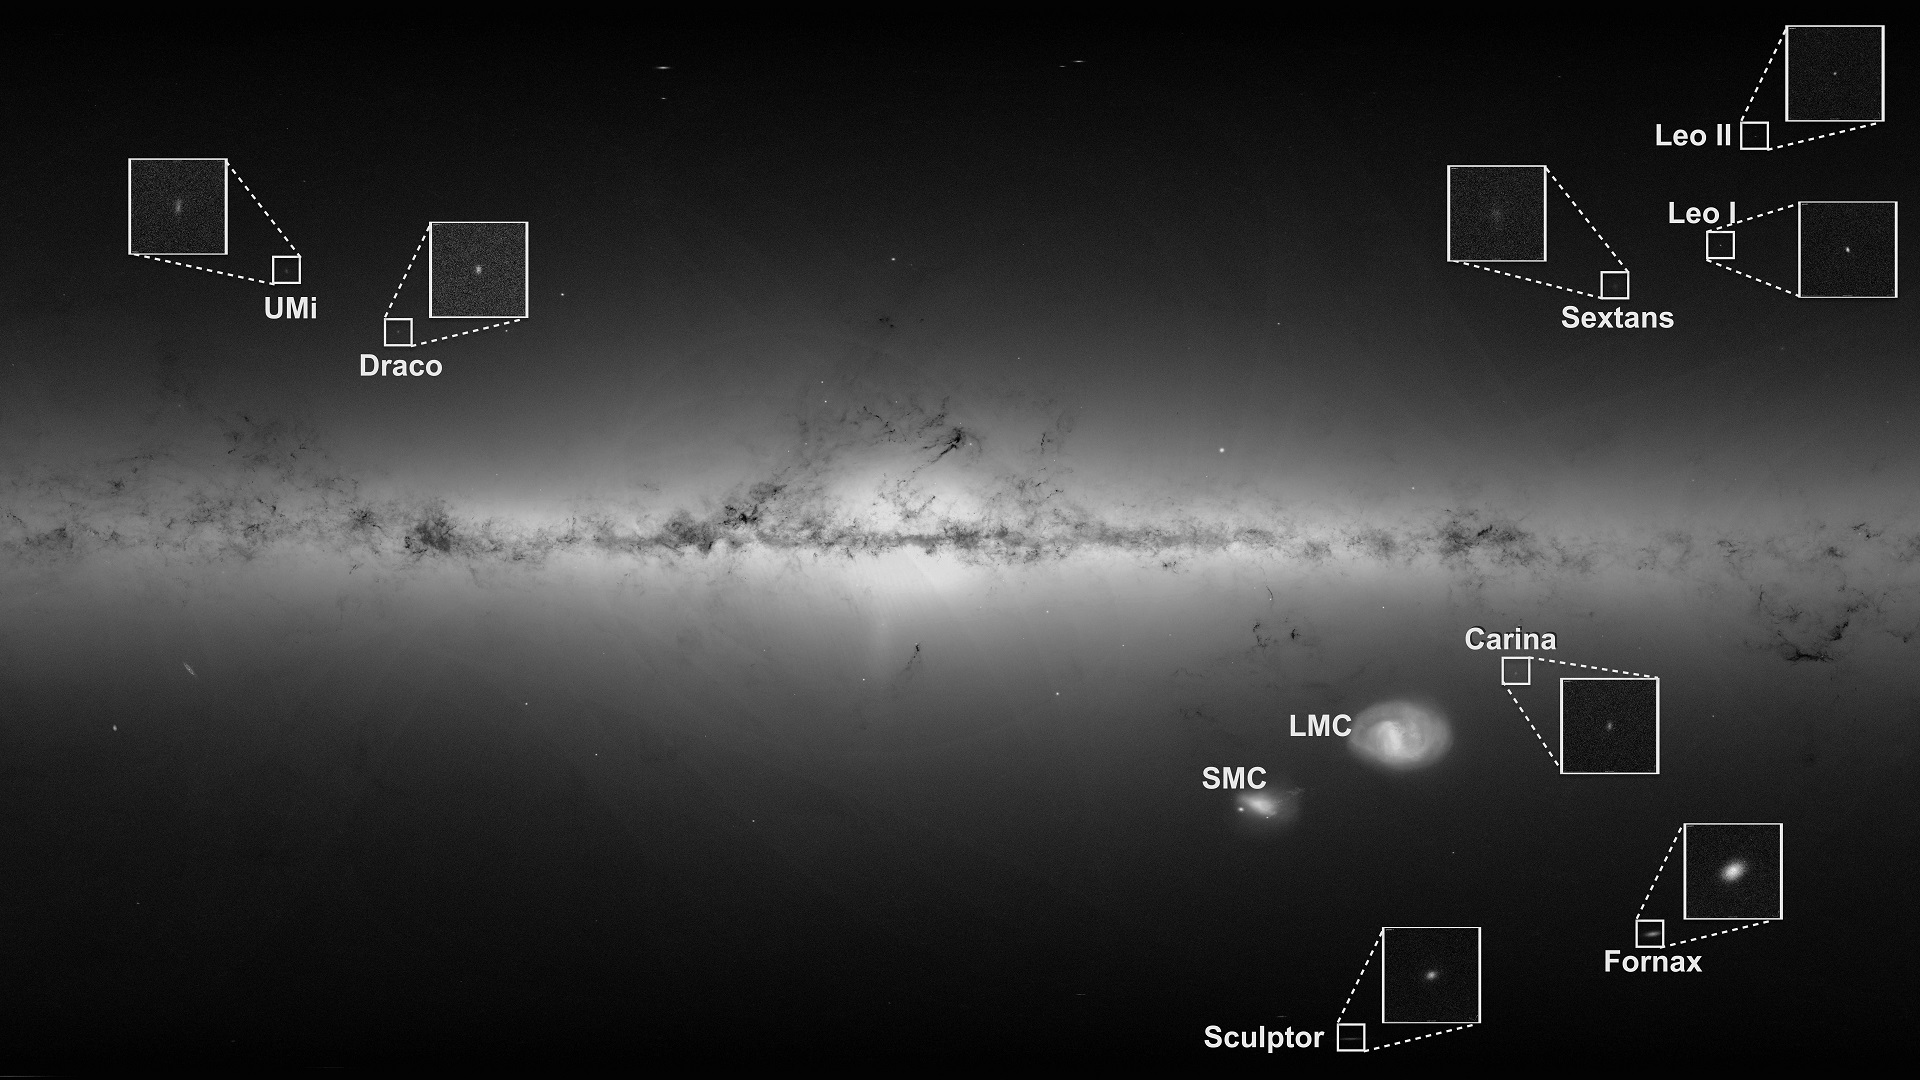 Monochrome image showing the Milky Way bulge stretching across the center and several smaller dwarf galaxies are seen in the vicinity. White boxes surround the smaller galaxies so their location can be seen.